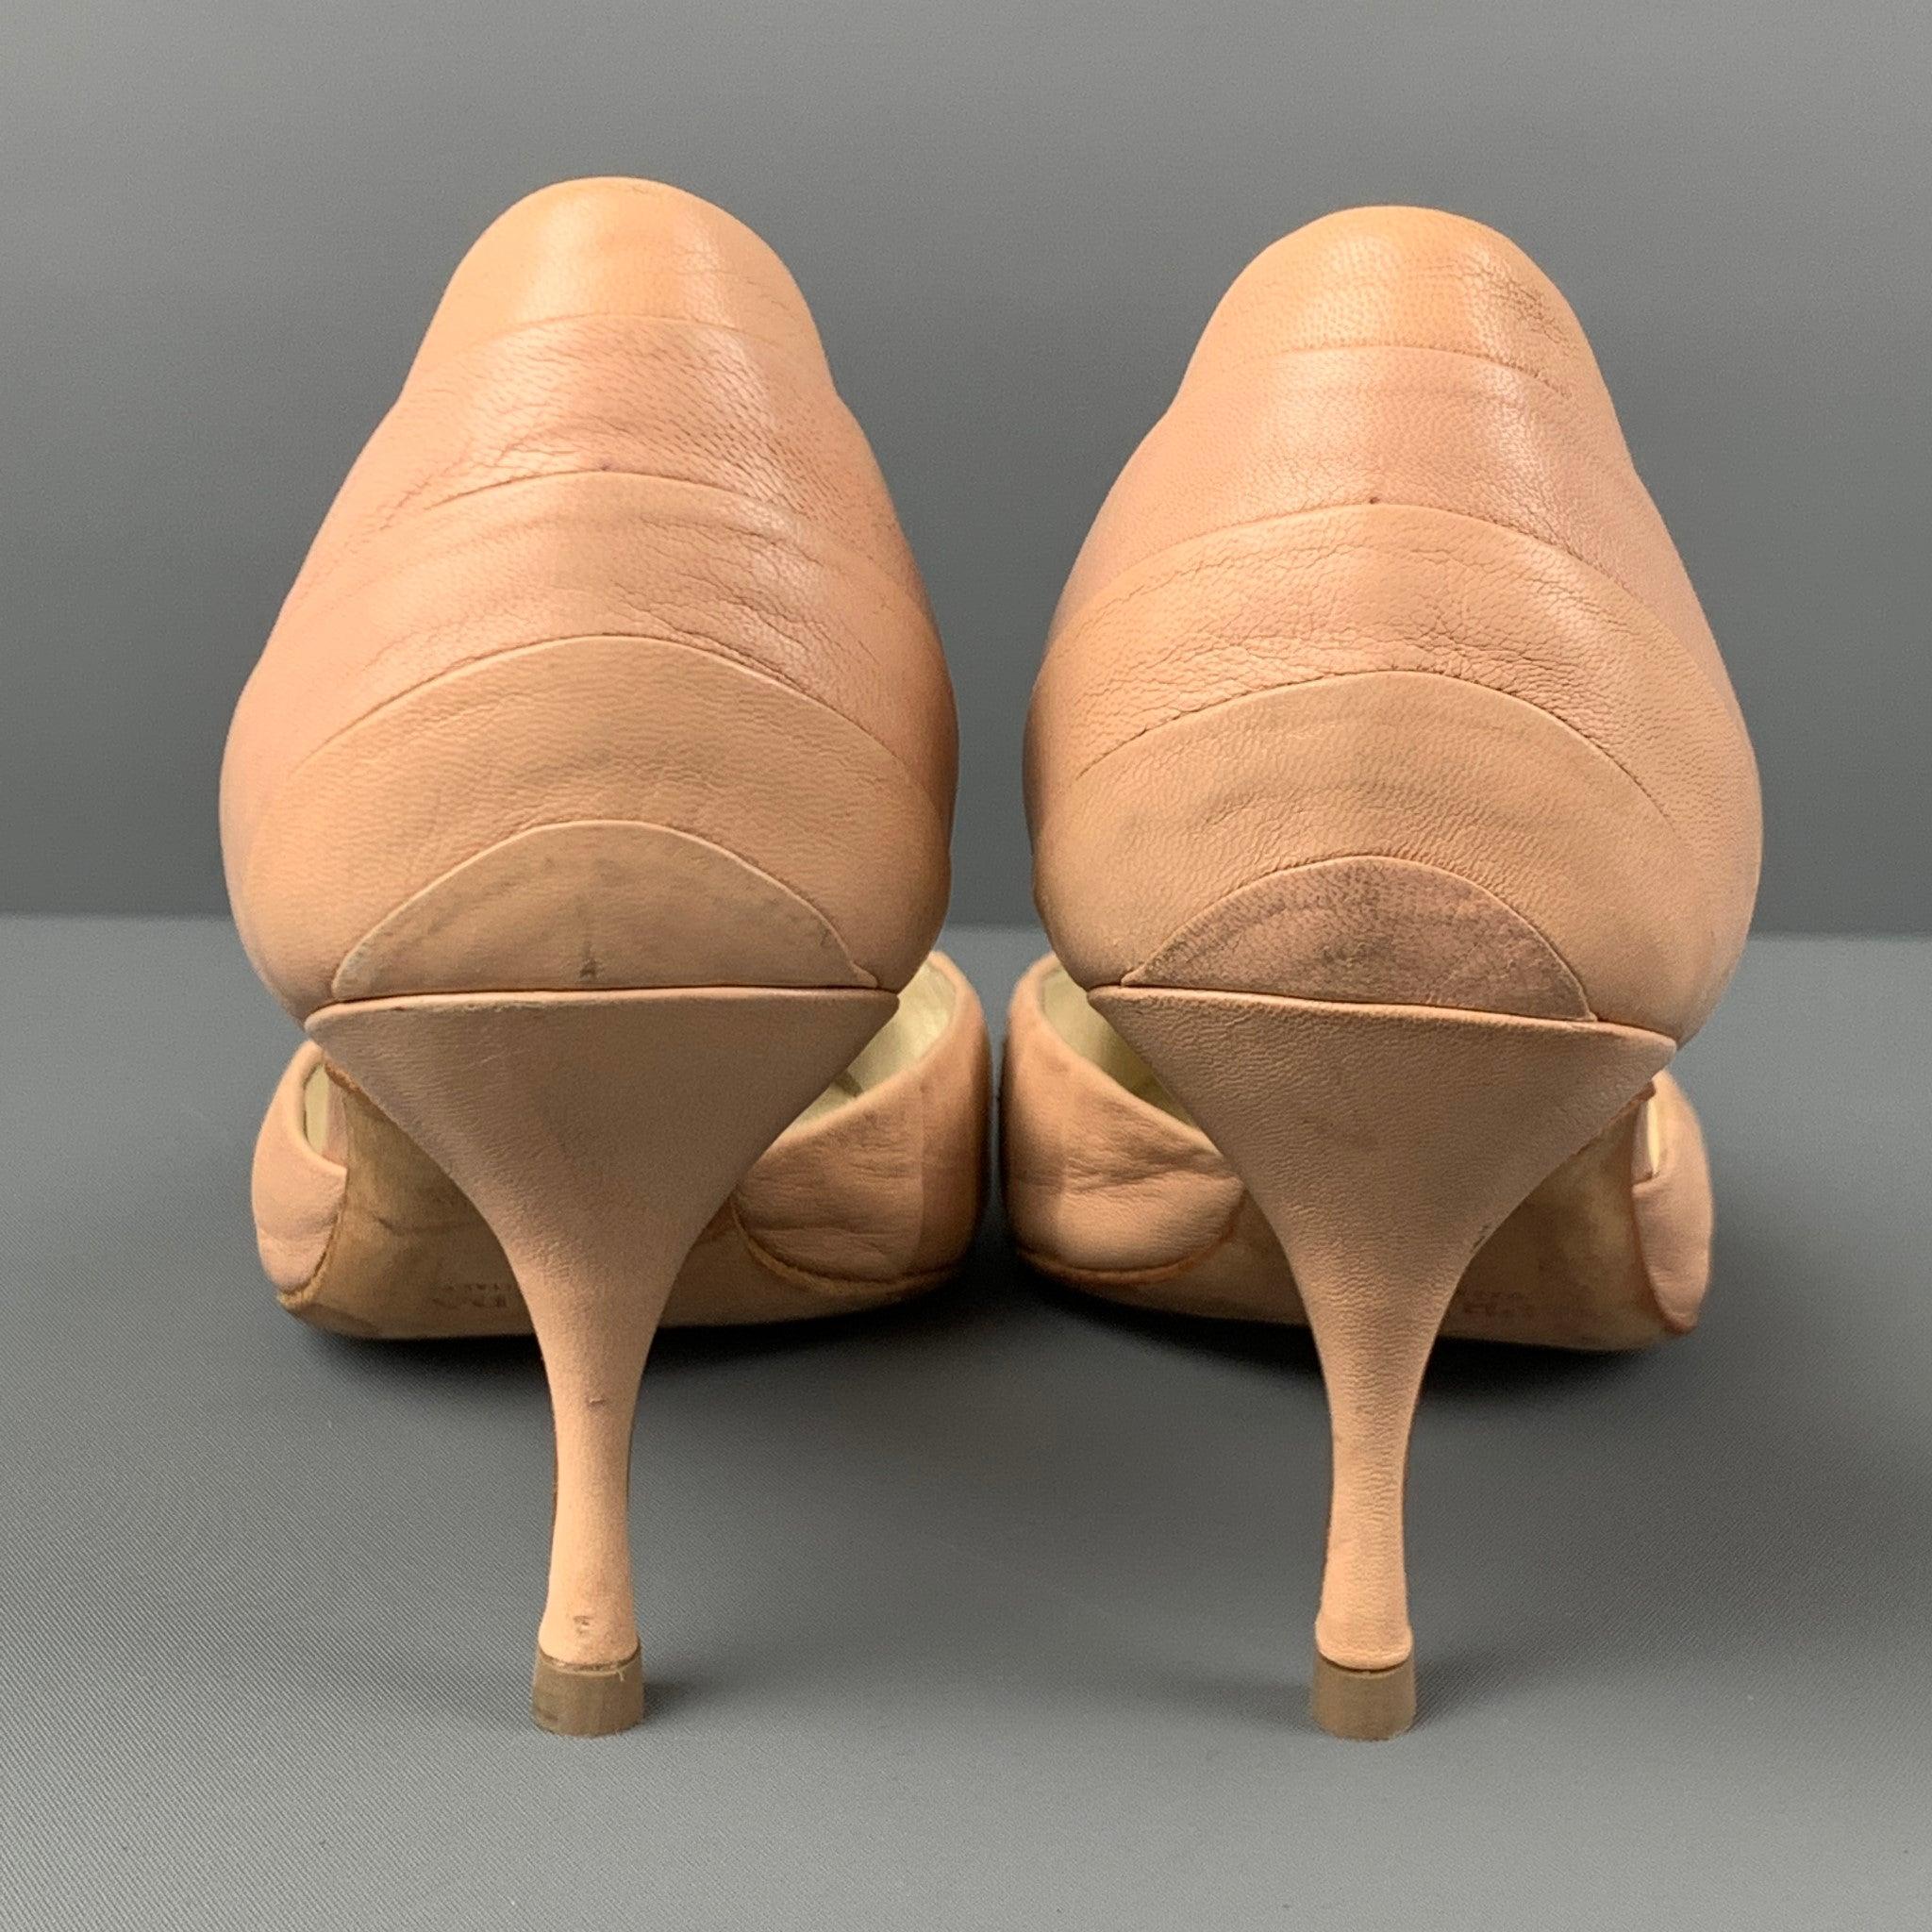 PRADA Size 6 Nude Leather D'Orsay Pumps 1